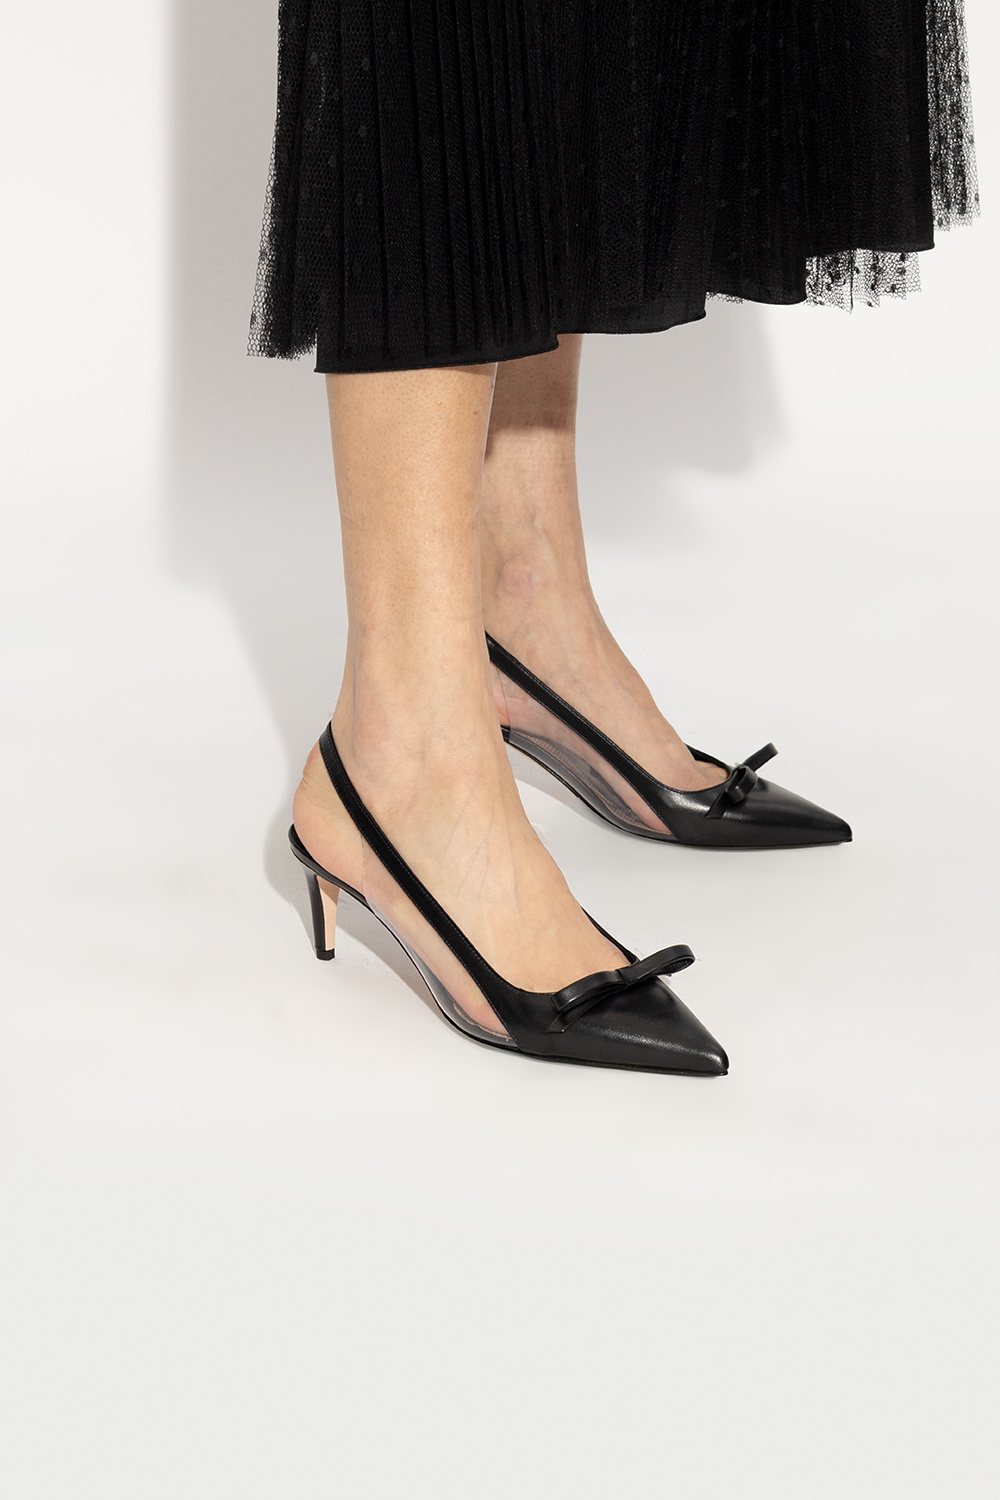 Red Valentino Leather pumps